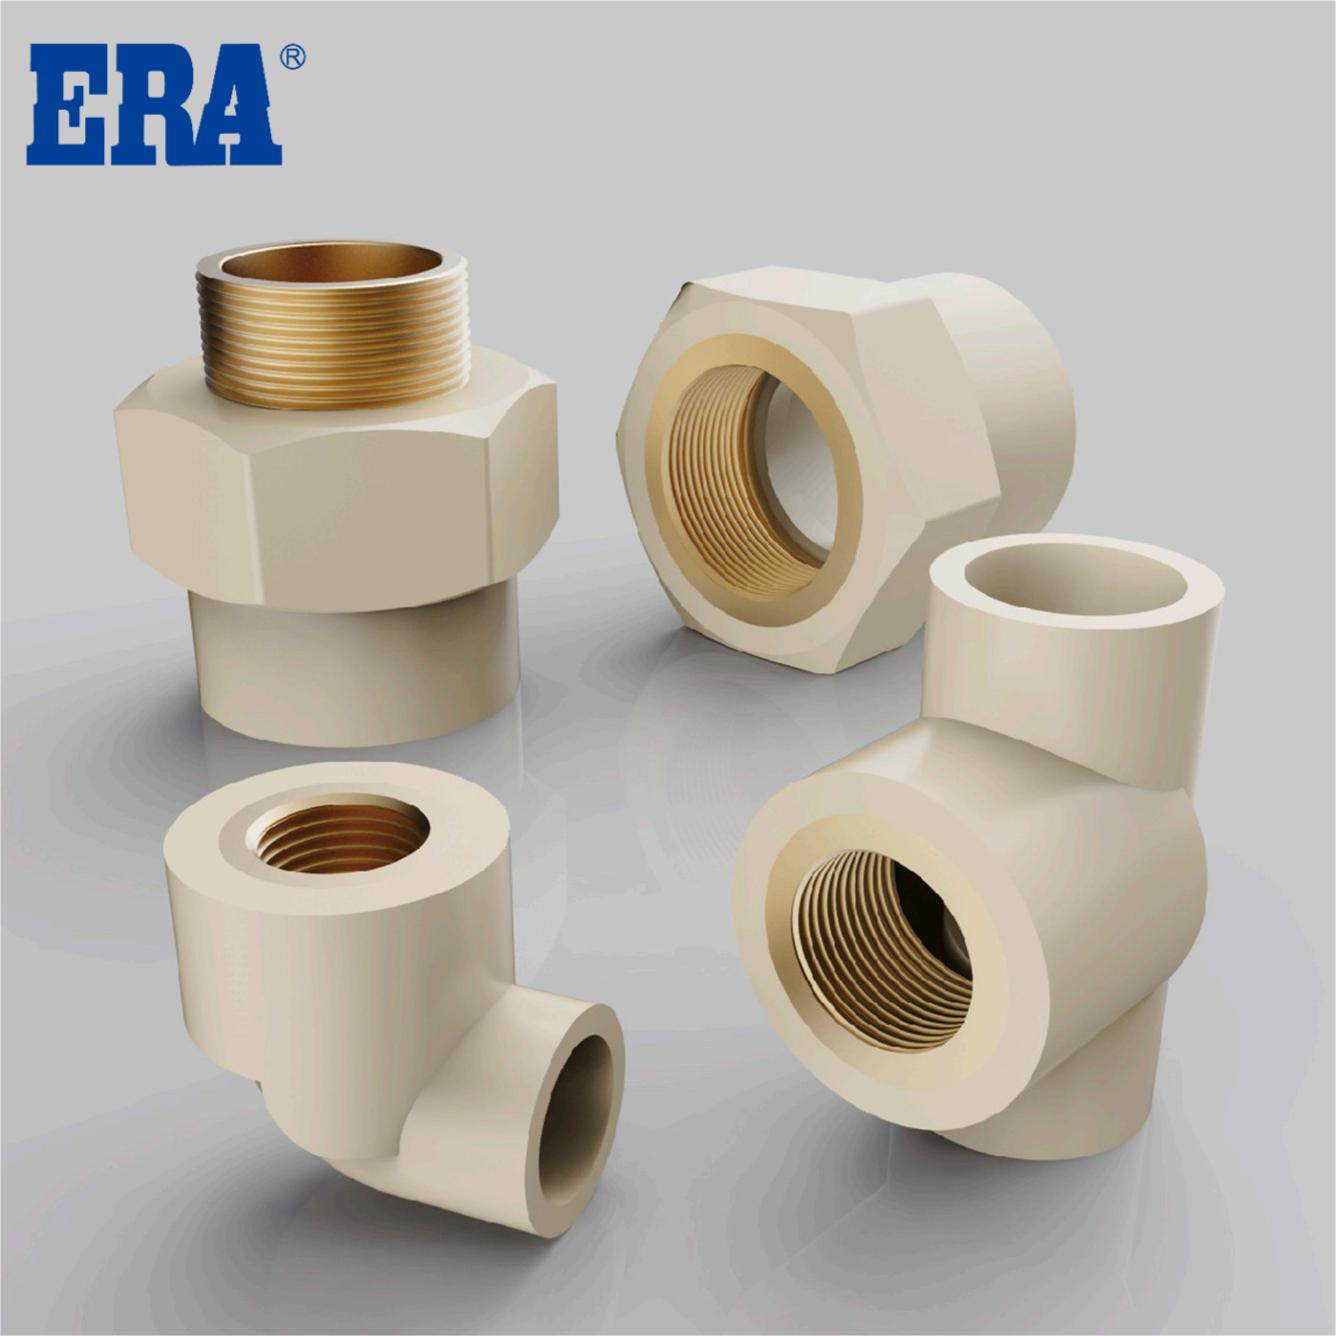 CPVC DIN PIPES&FITTINGS FOR HOT AND COLD